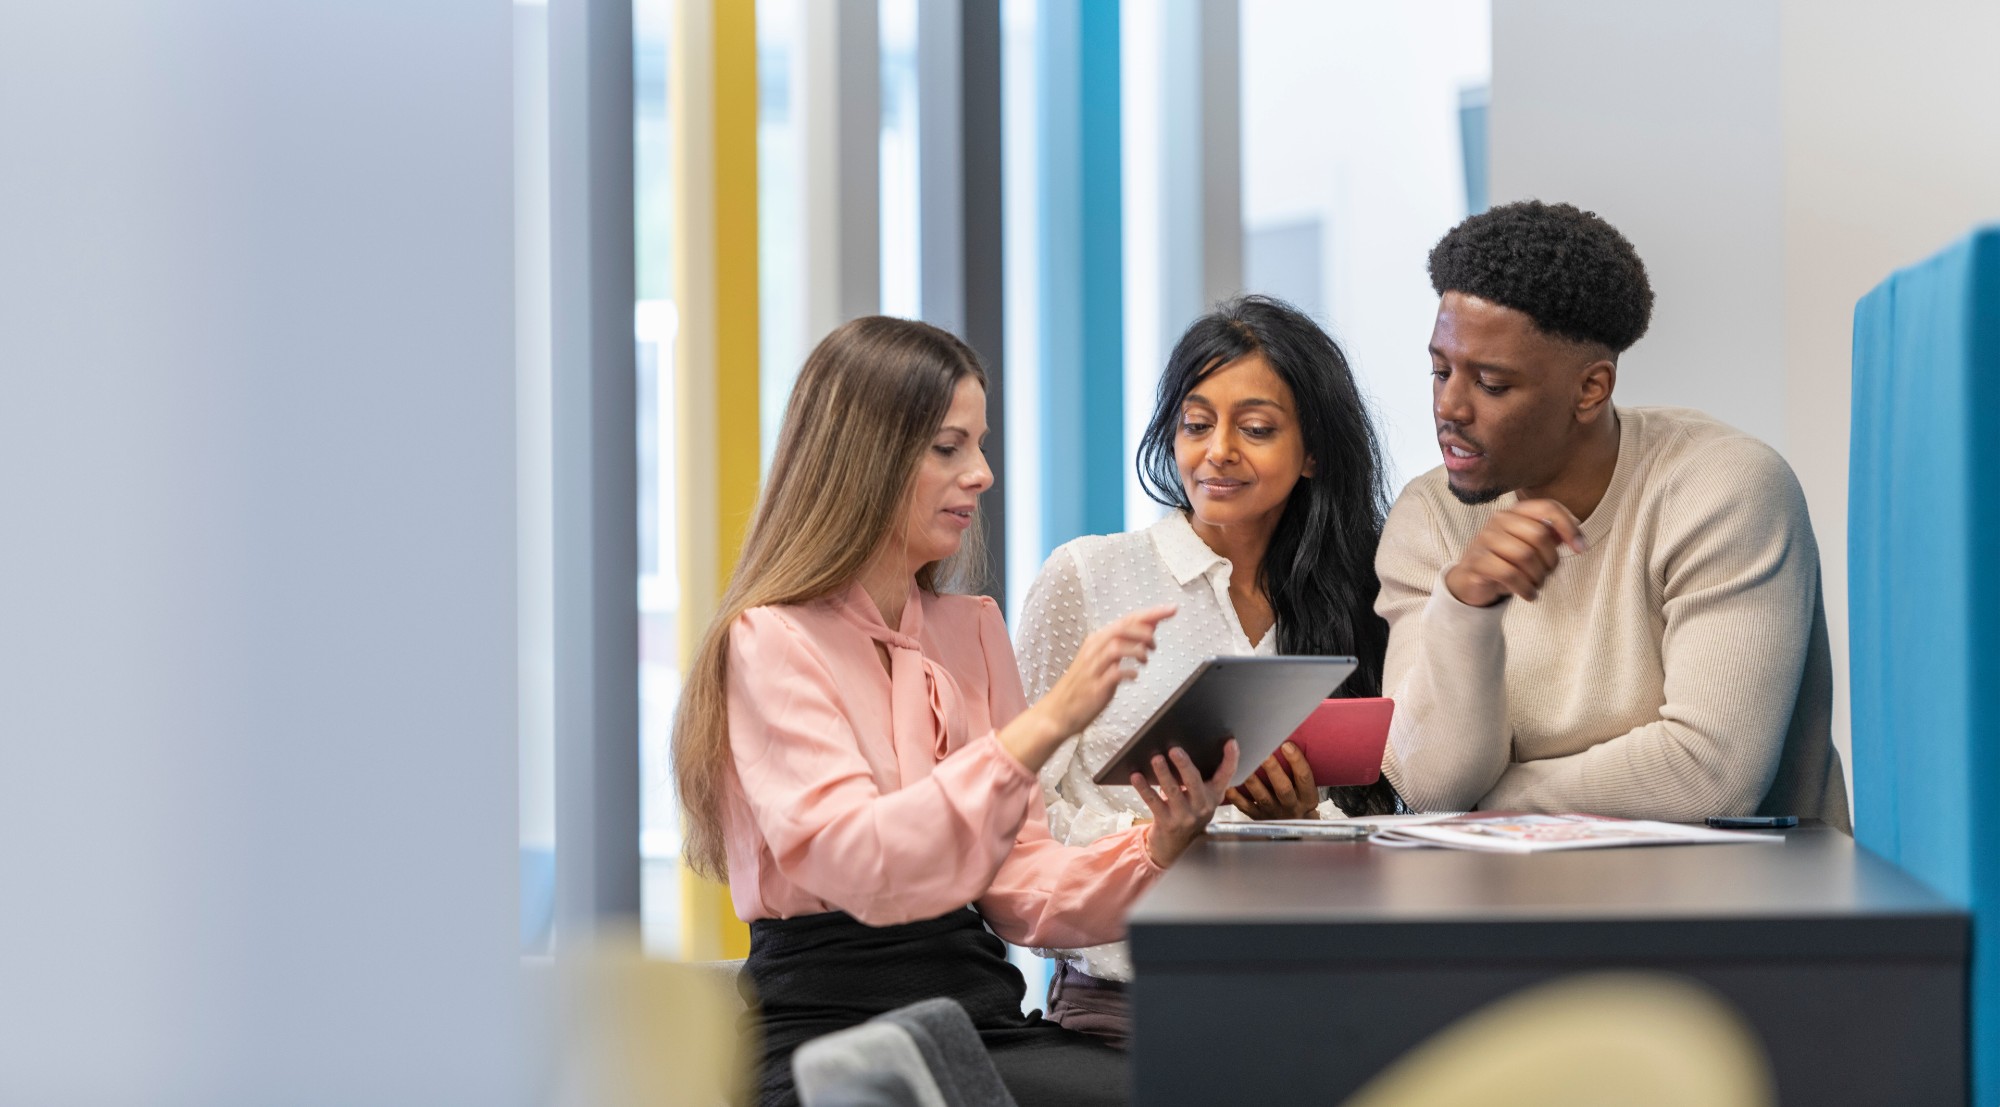 Three students in a corporate office setting looking at a piece of academic written work